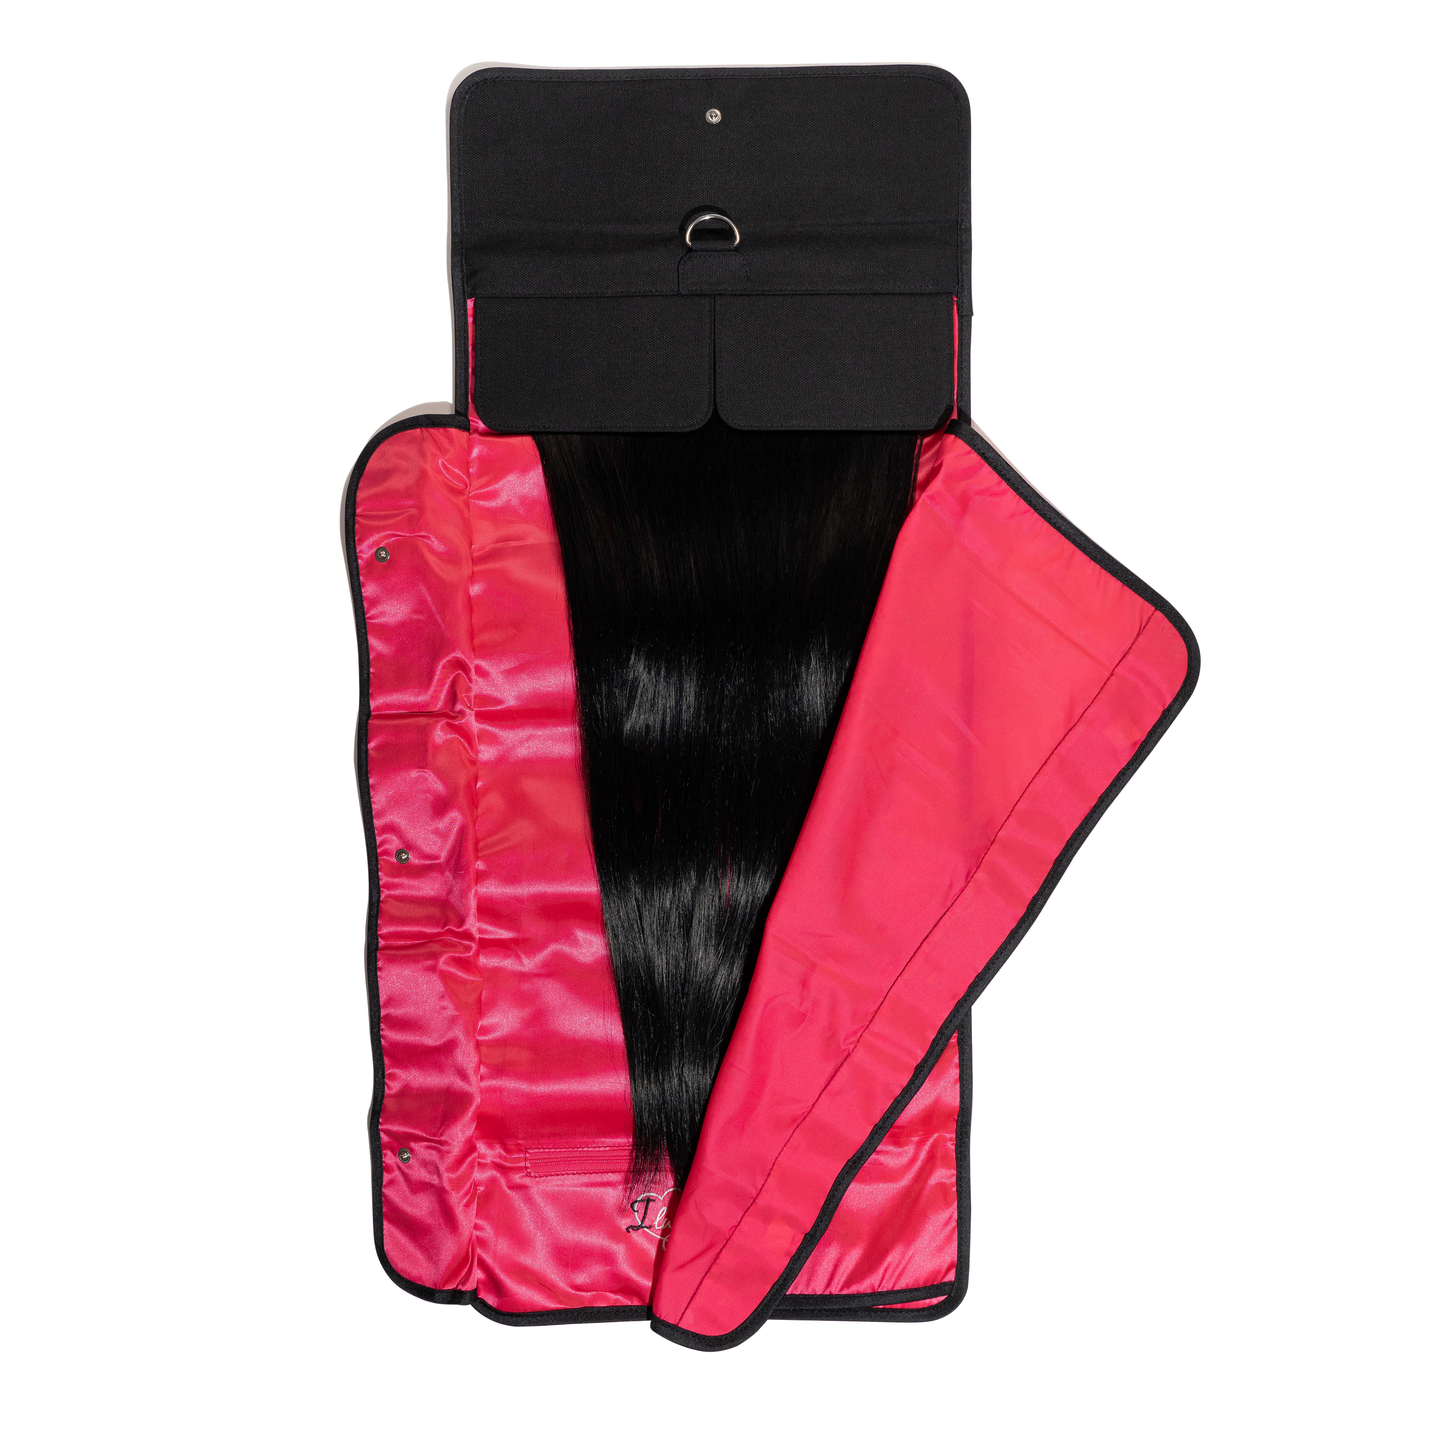 Luxury Storage and Travel Hair Extensions Case